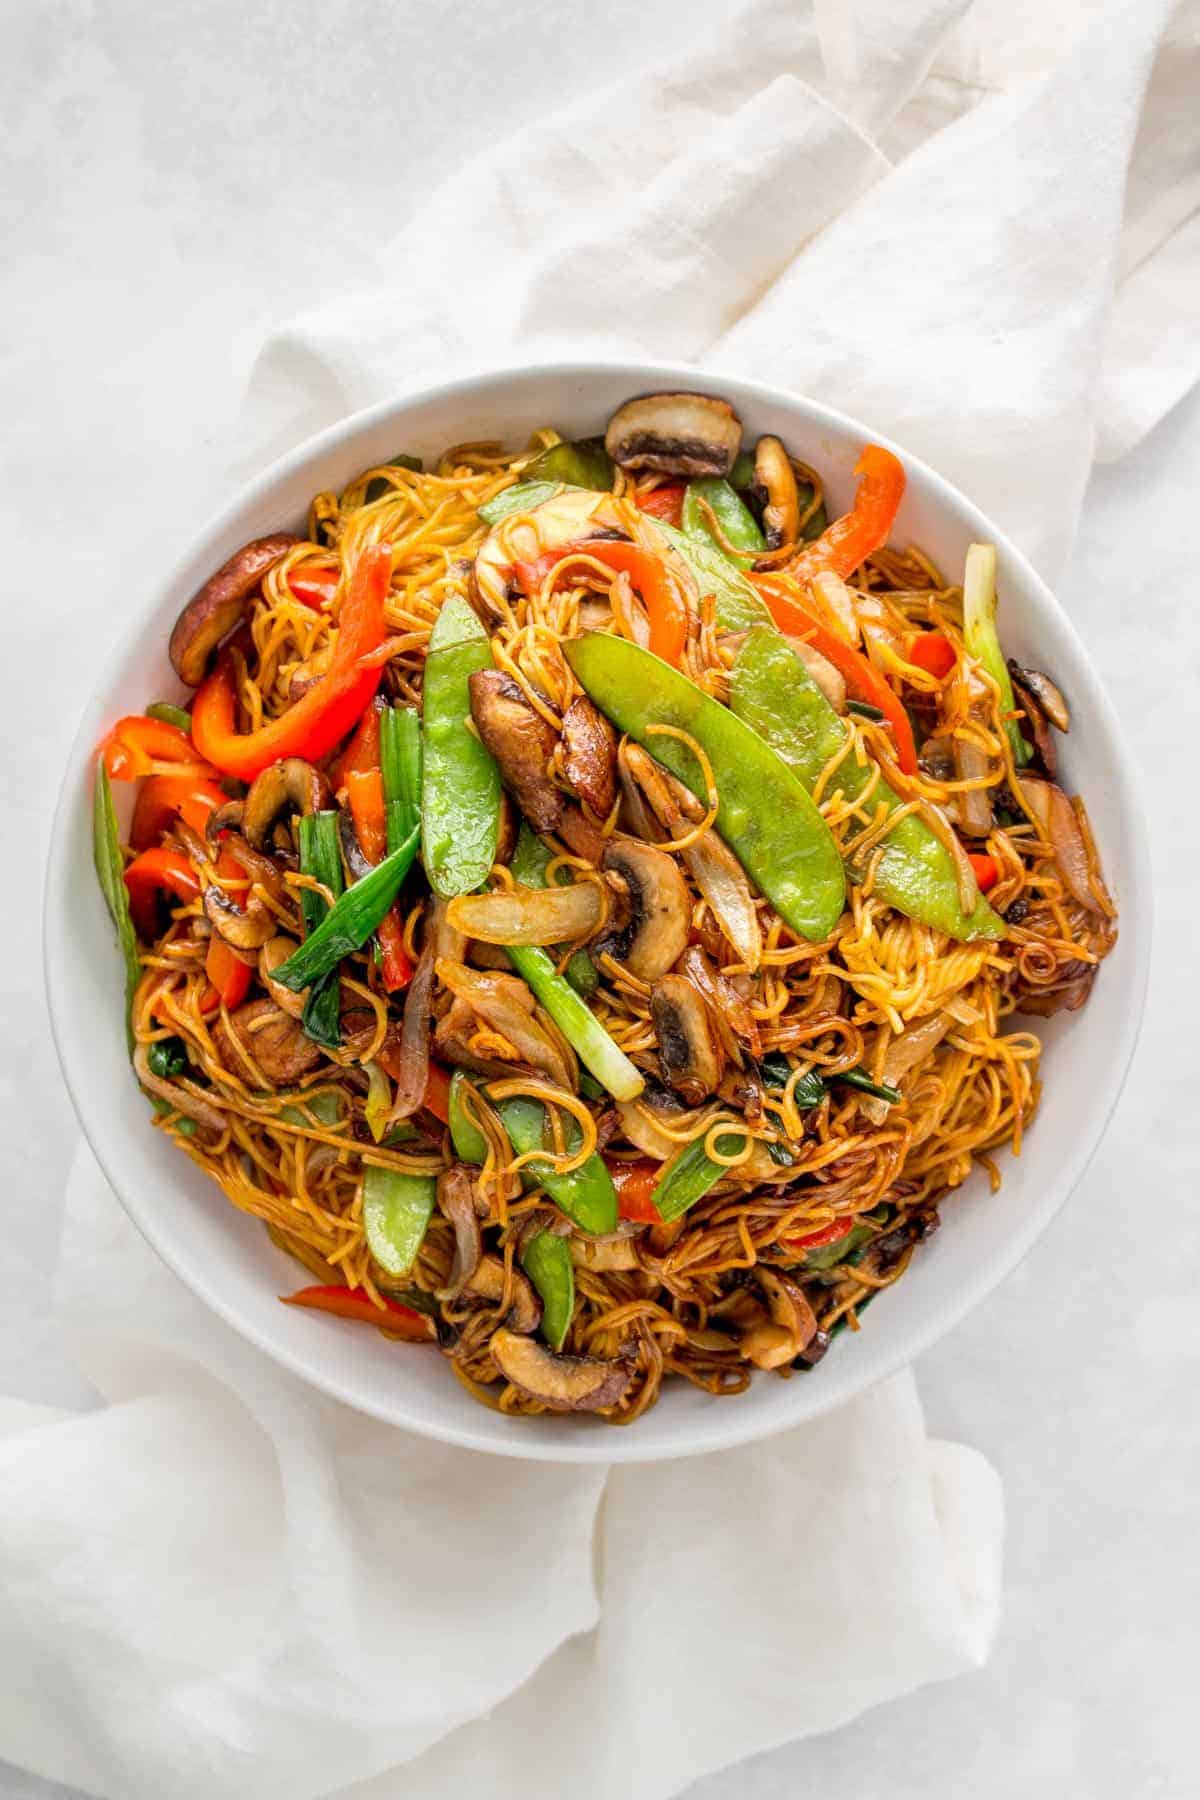 A large plate of soy sauce pan fried noodles with vegetables.